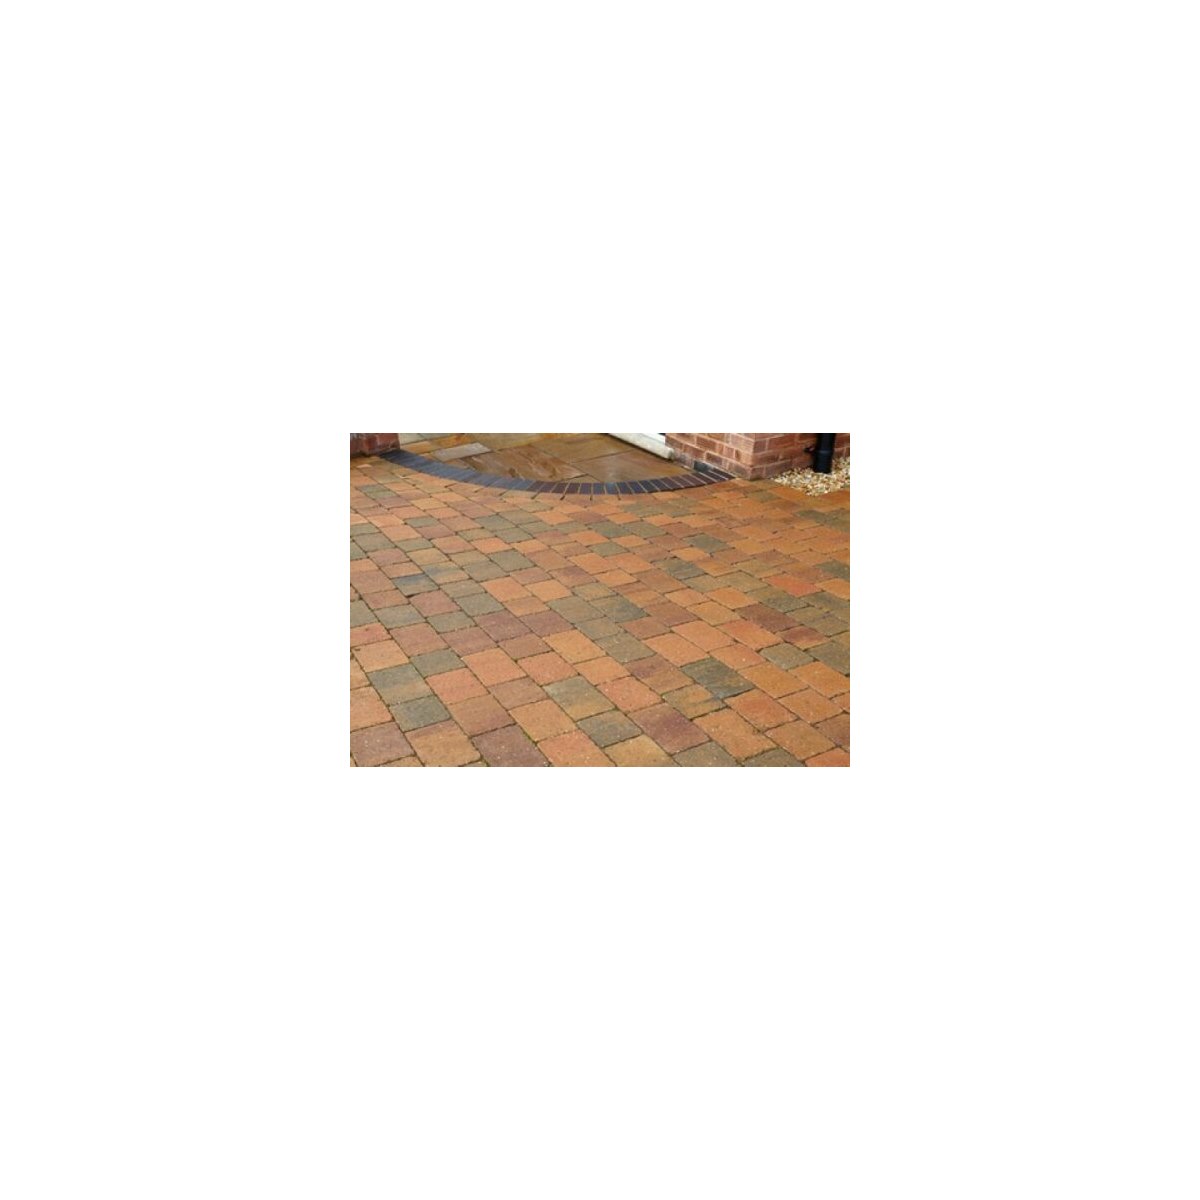 Paving Sealer that gives a Wet Look finish